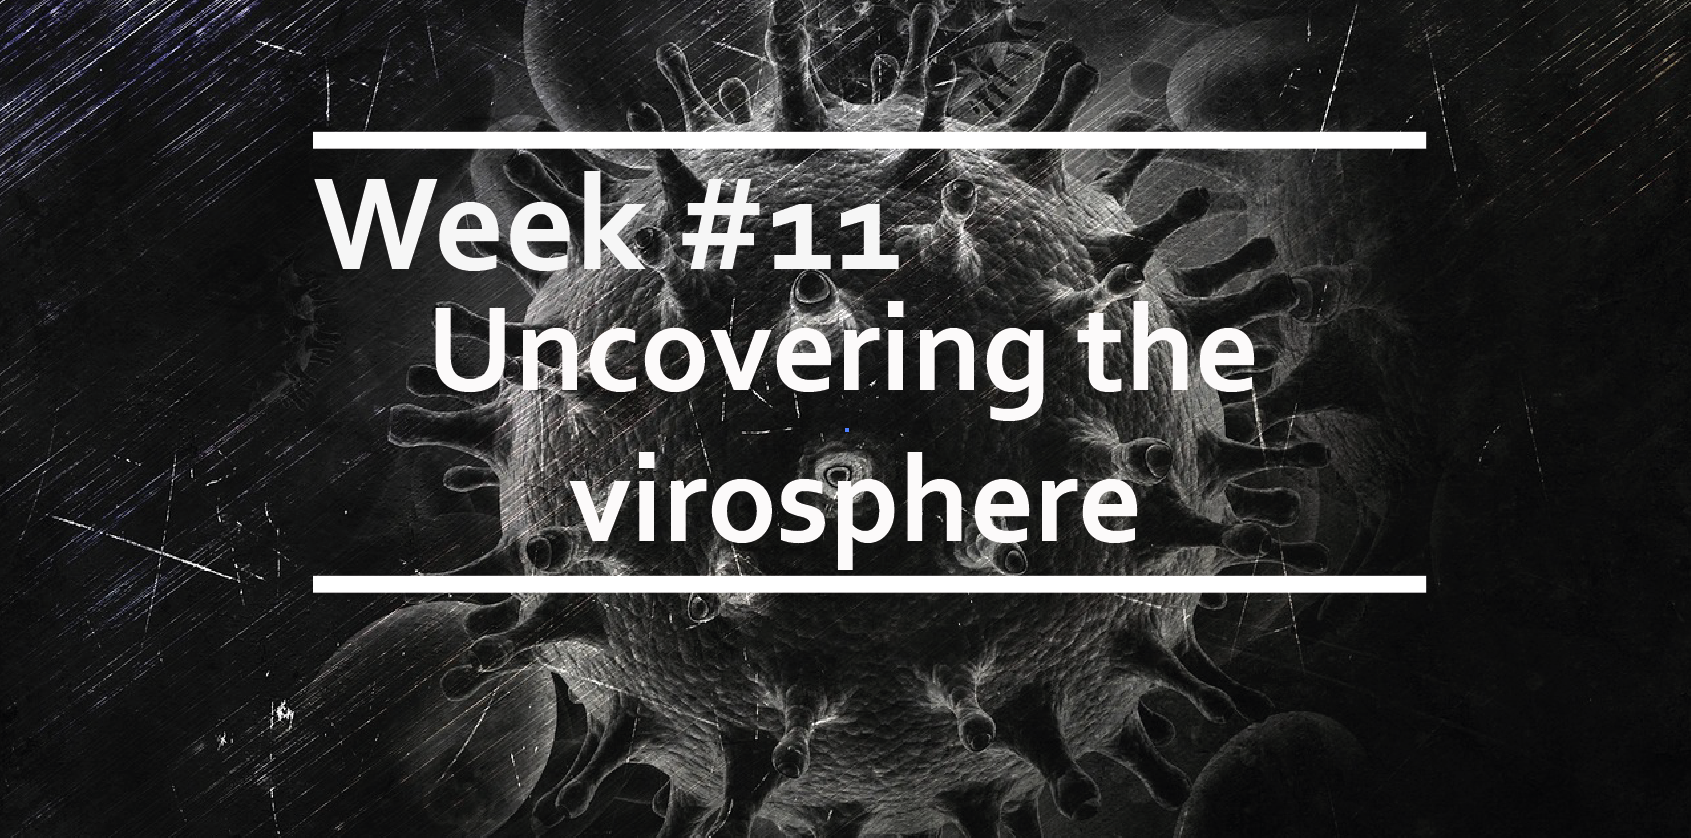 Uncovering the virosphere